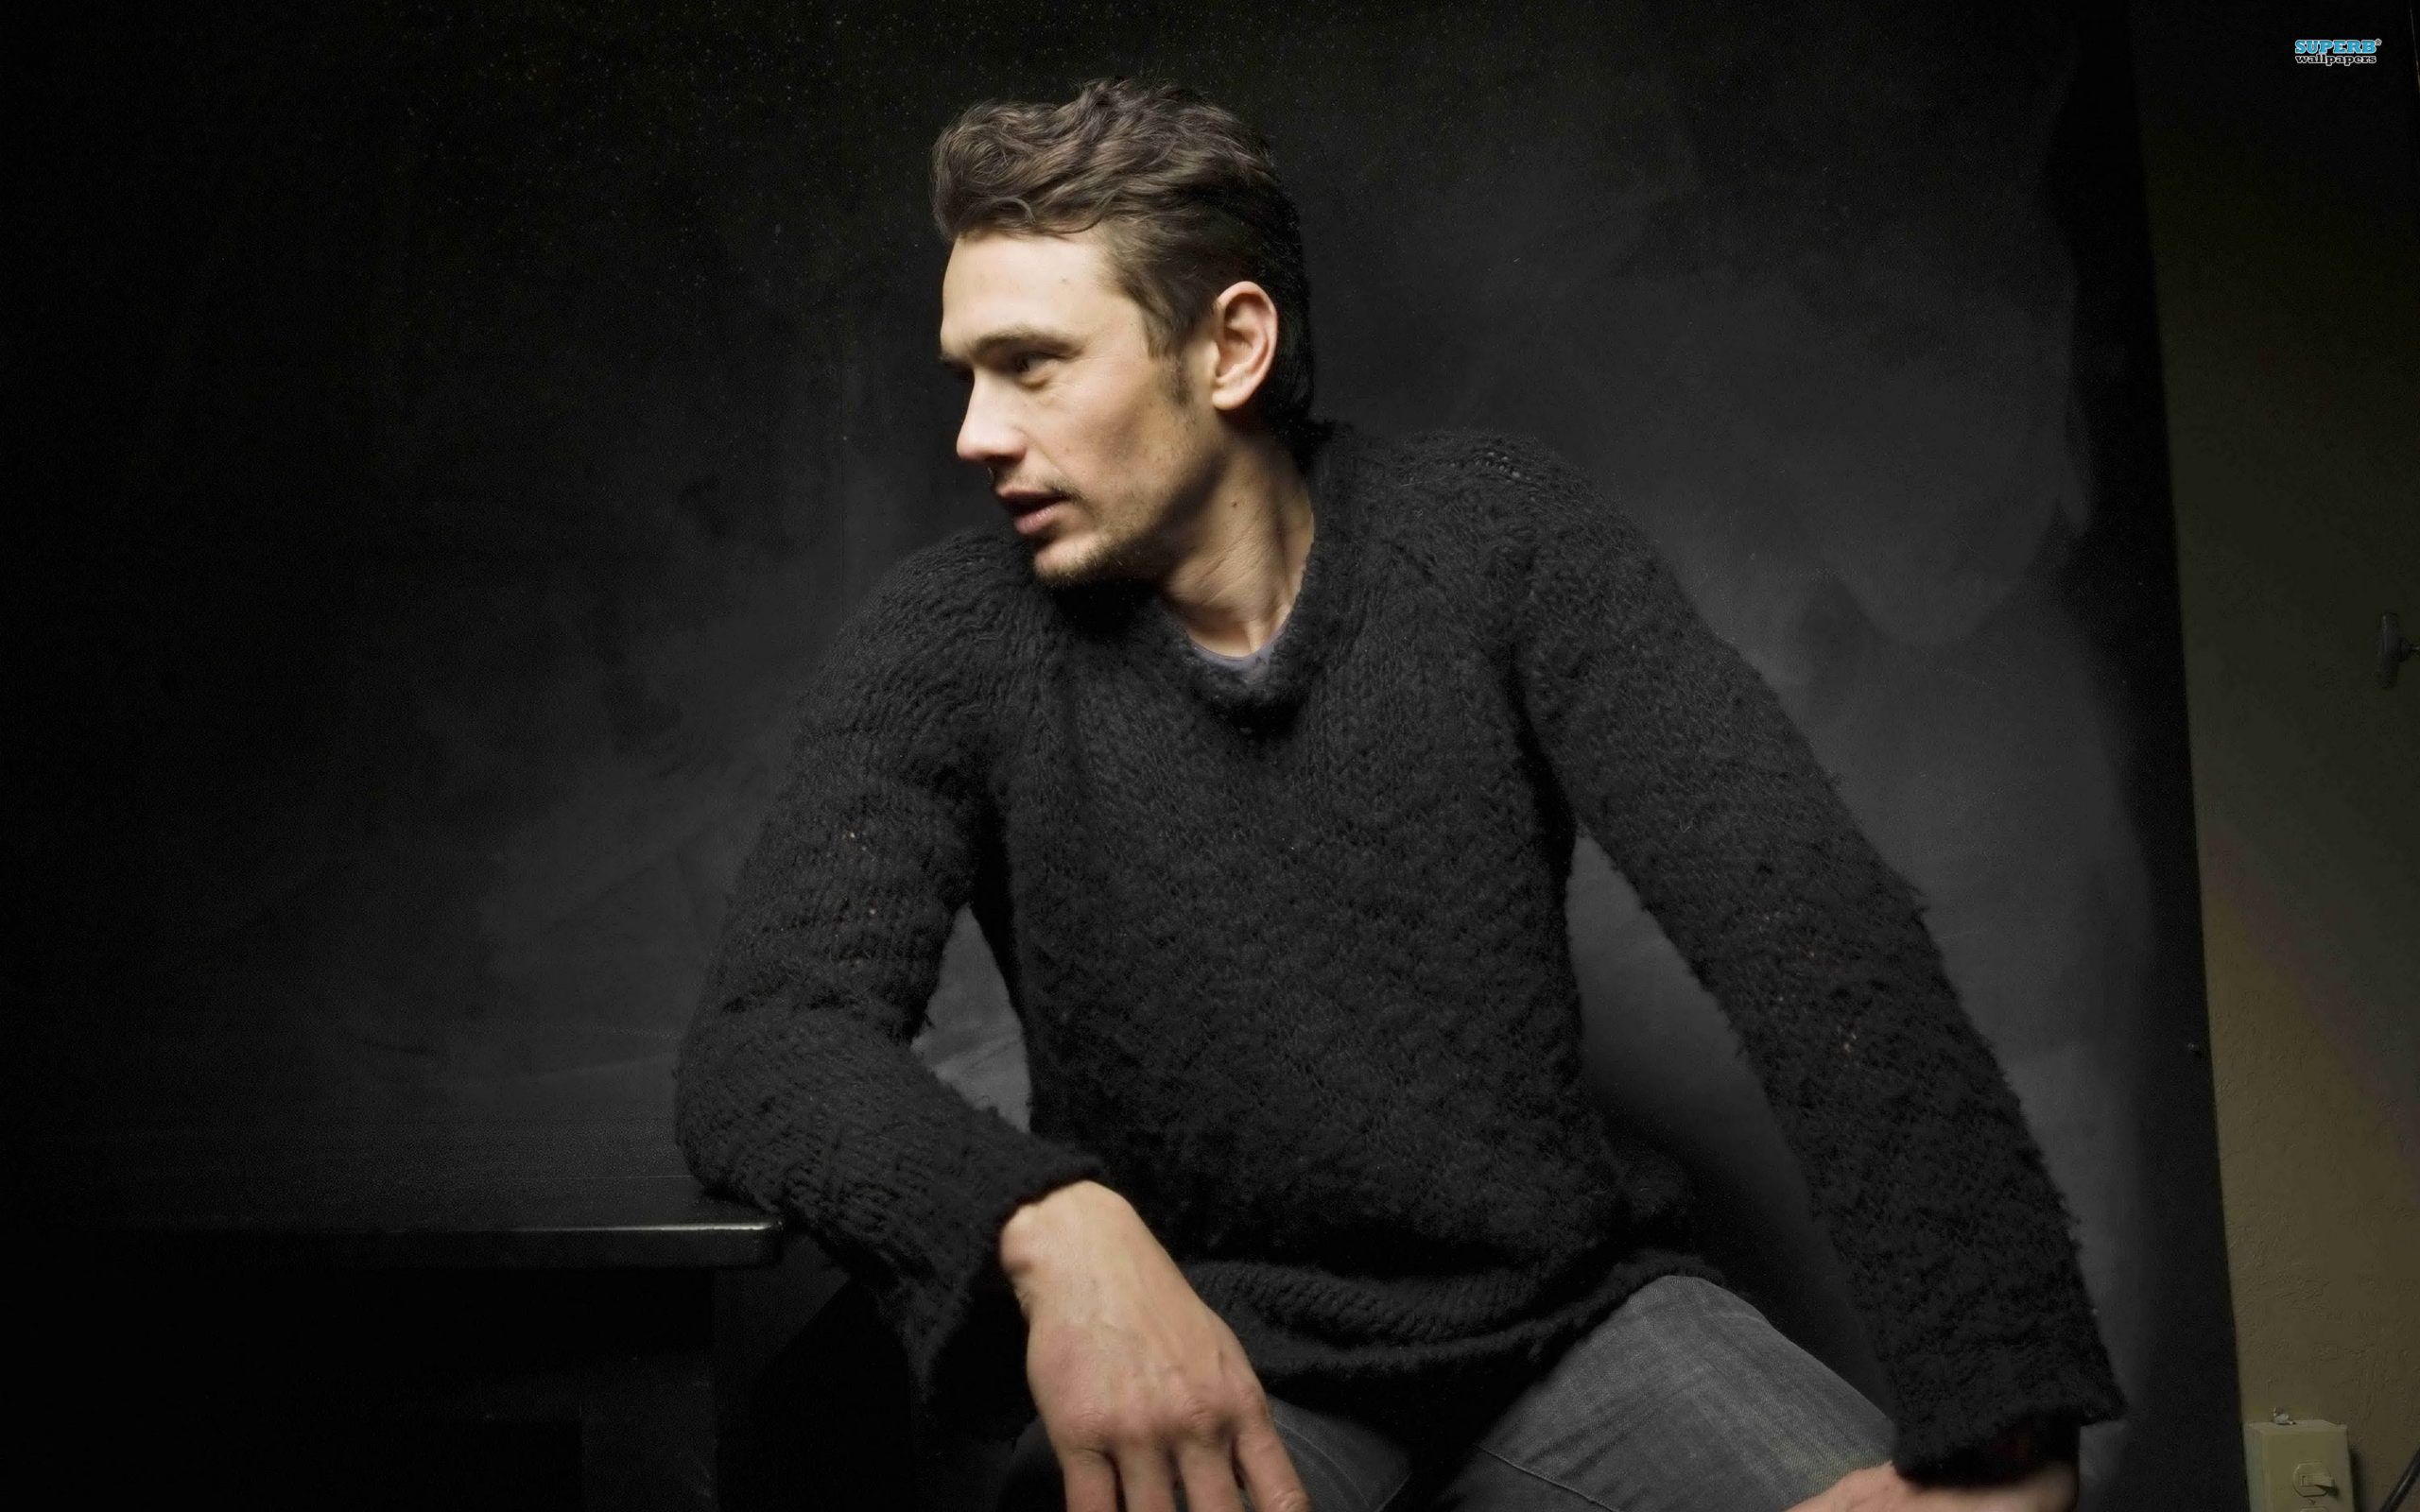 James Franco Wallpapers High Resolution and Quality Download